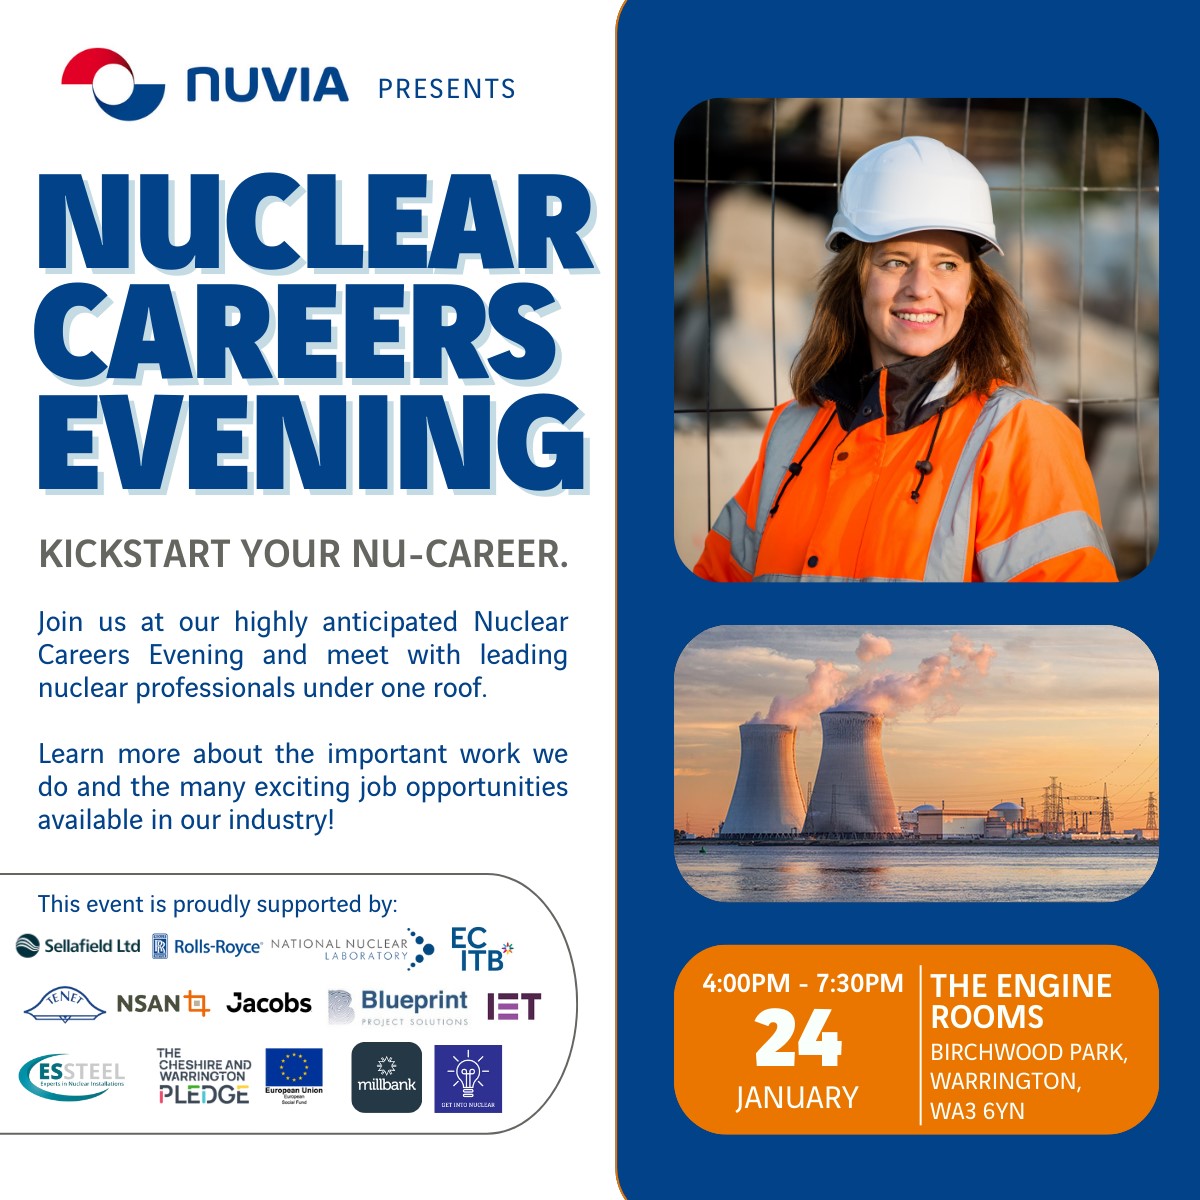 Nuclears Careers evening